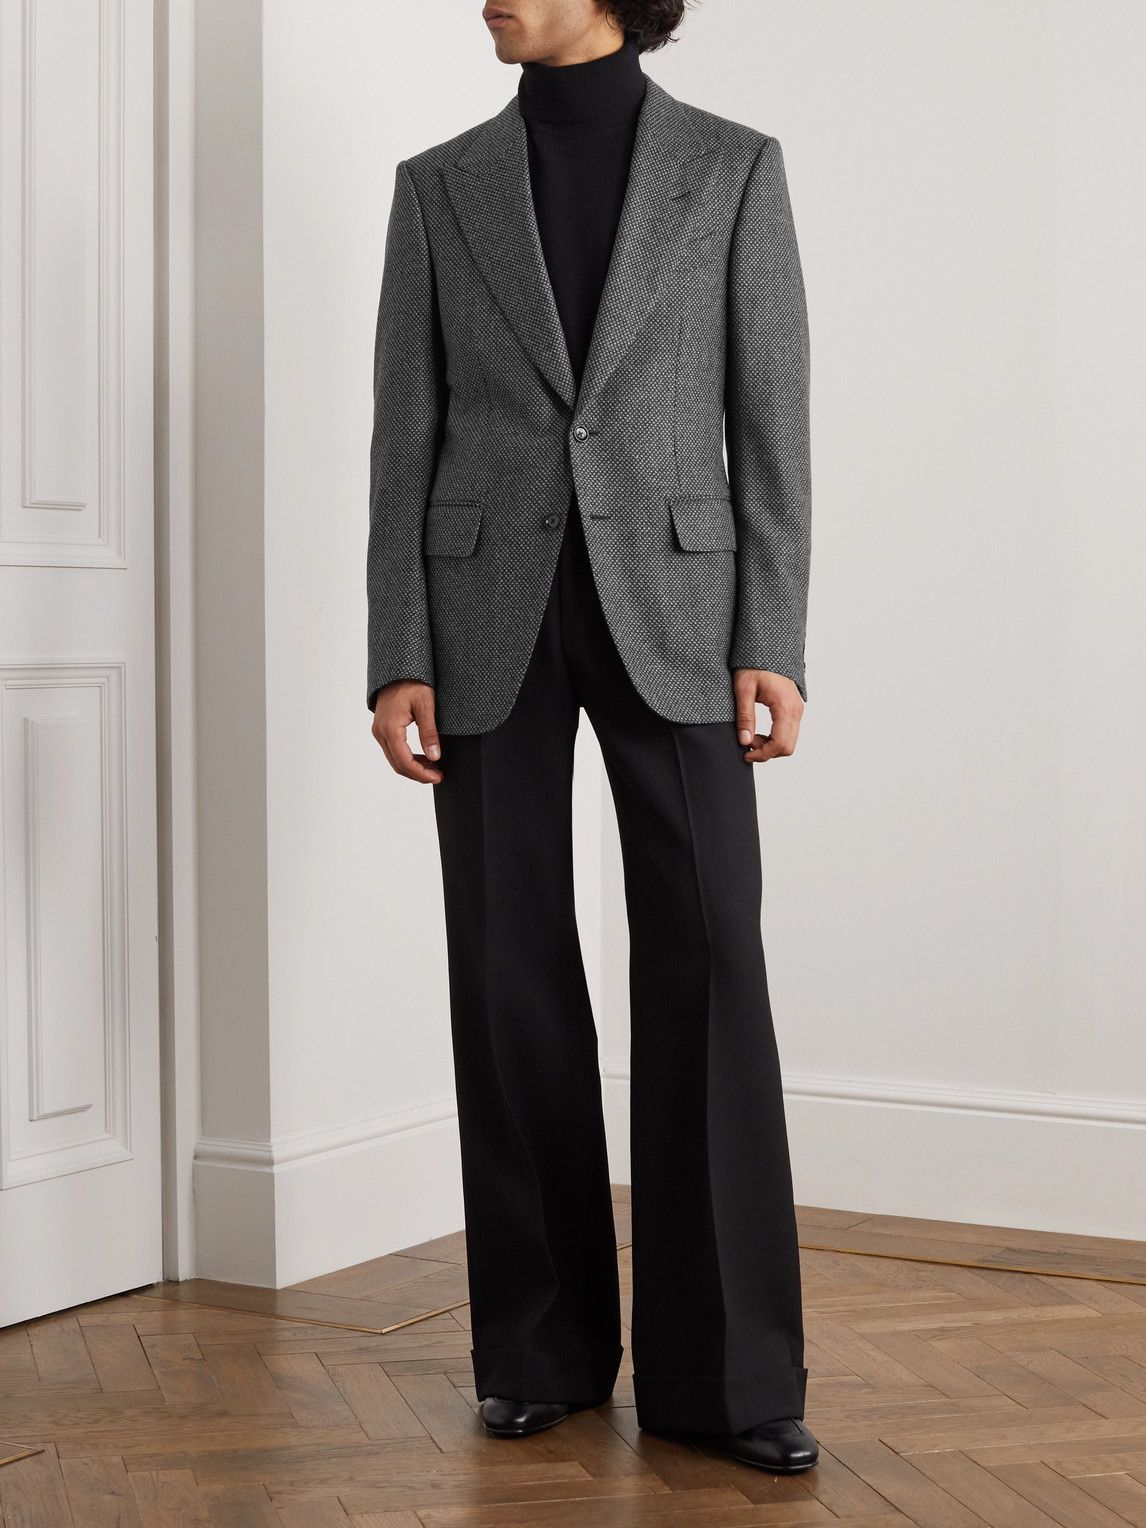 Sophisticated Staples: Elevating Your Look with Blazers for Men